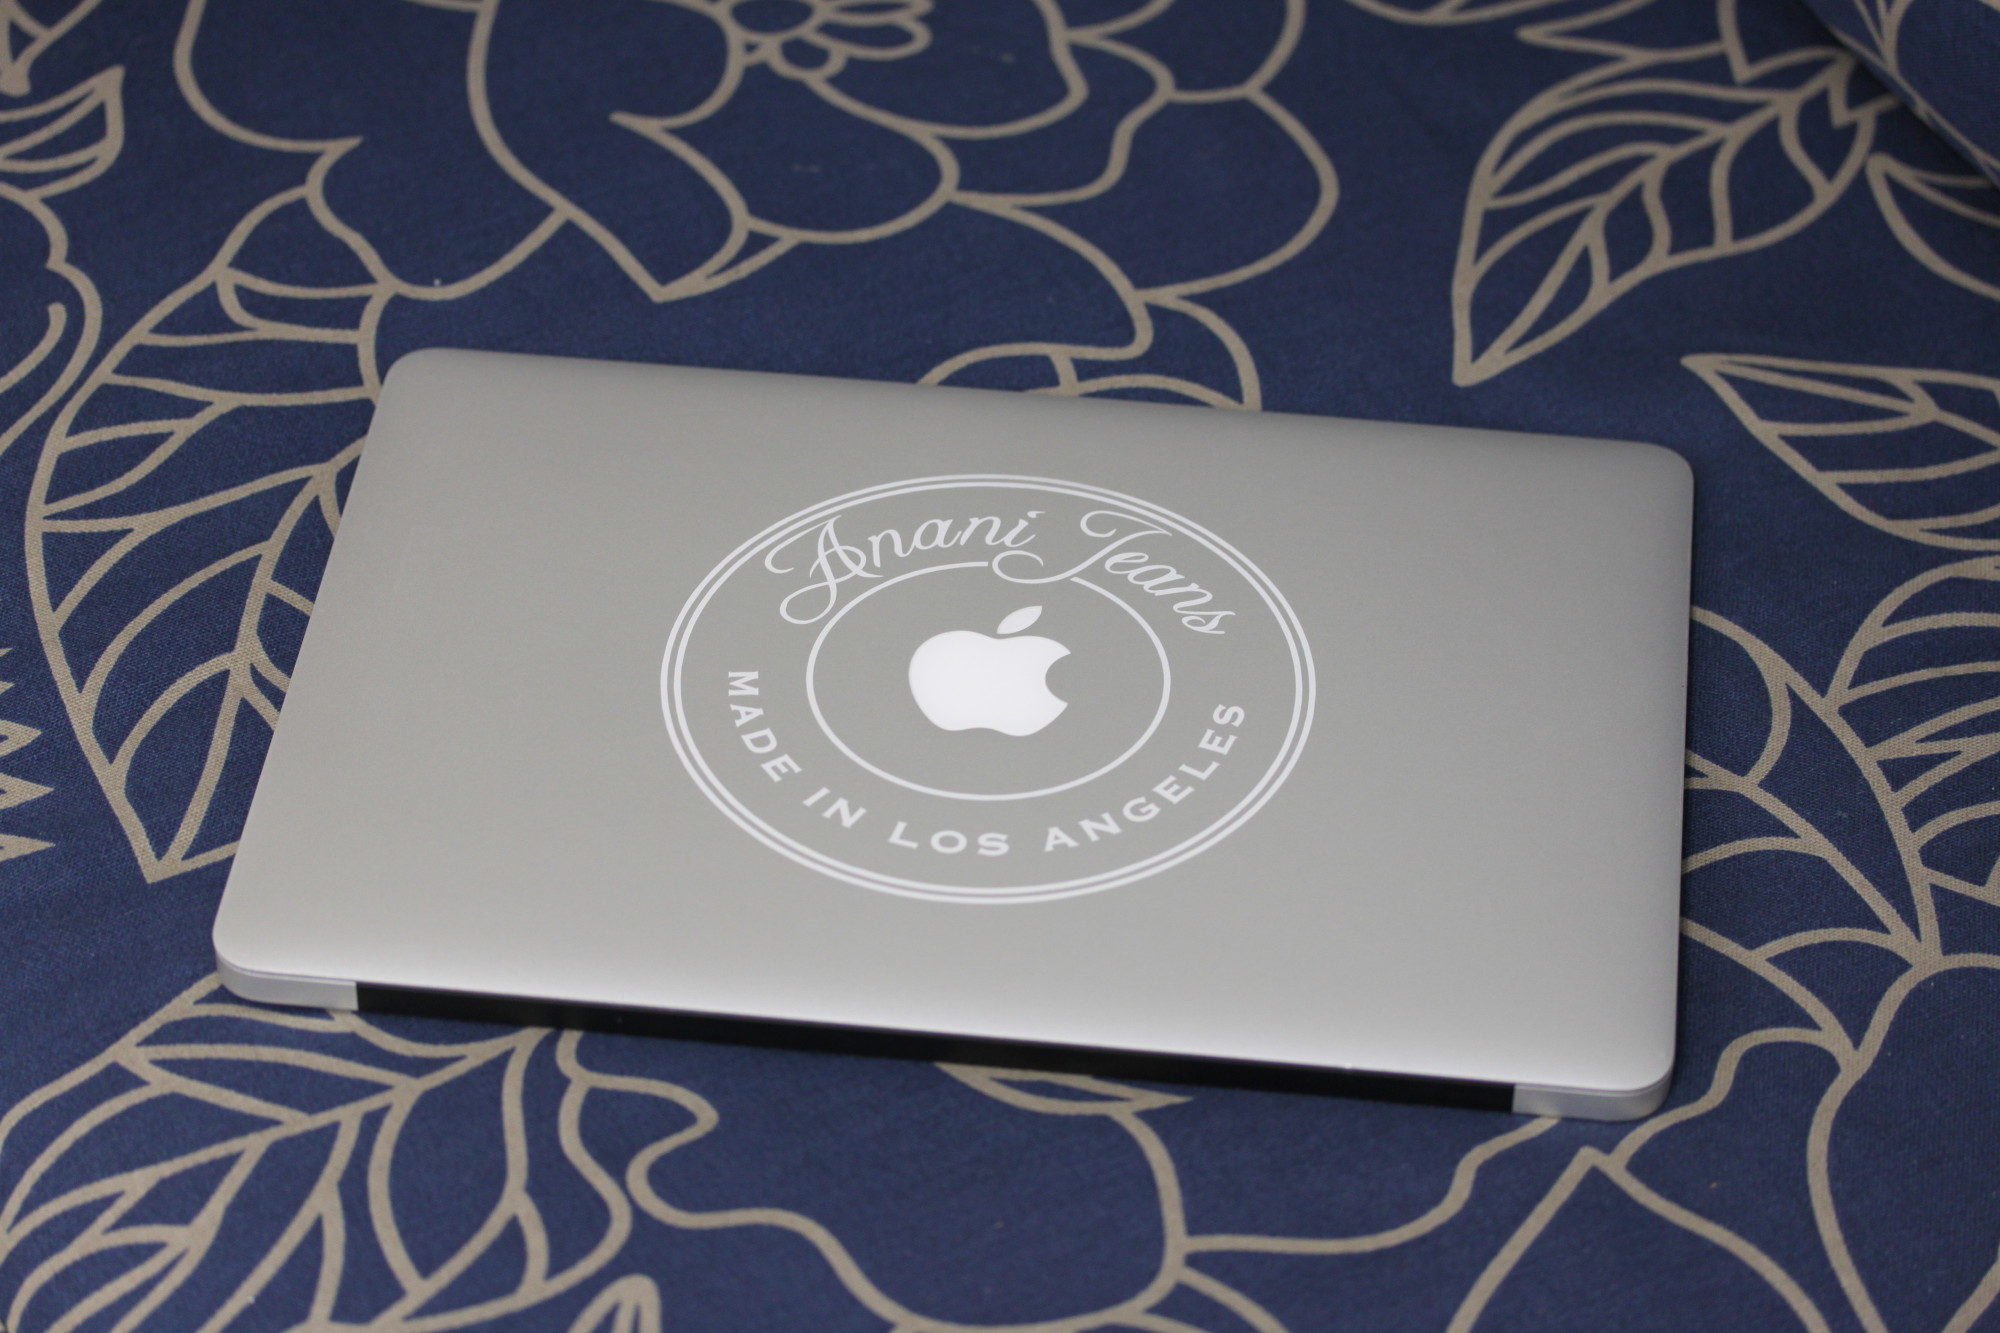 Personalized MacBook Engraving